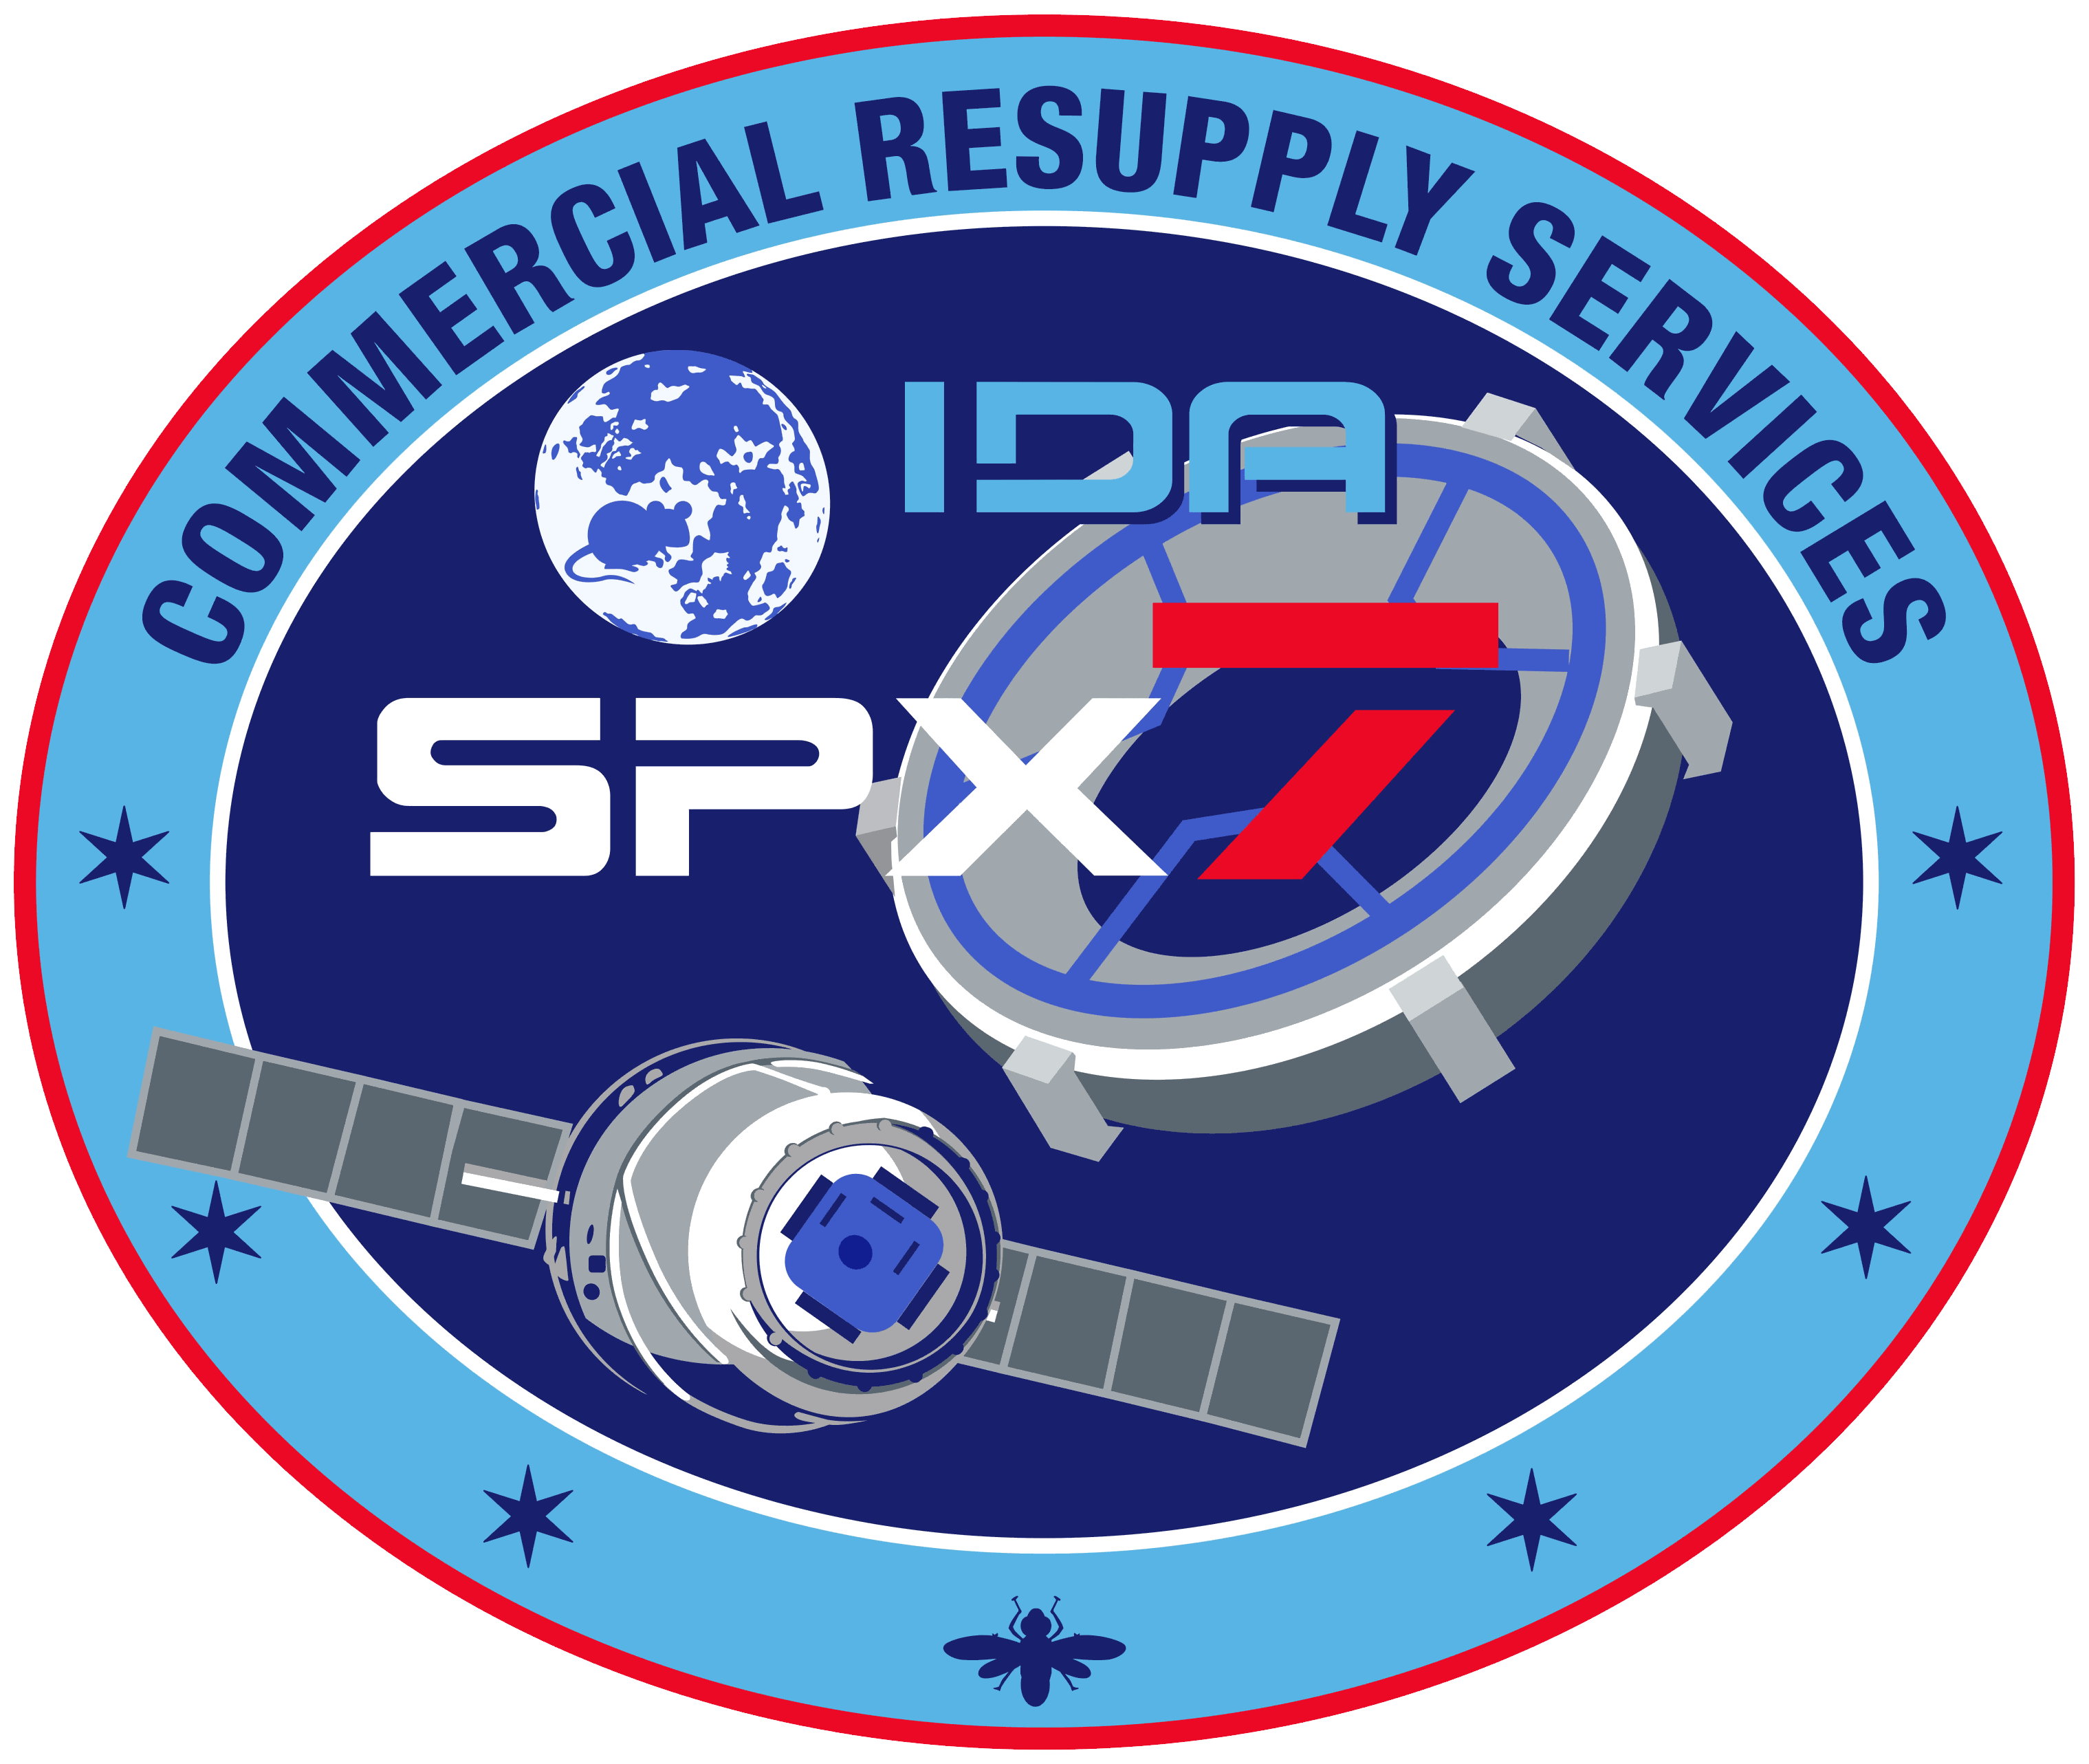 SpaceX Mission Logo - File:SpaceX CRS-7 Patch.png - Wikimedia Commons